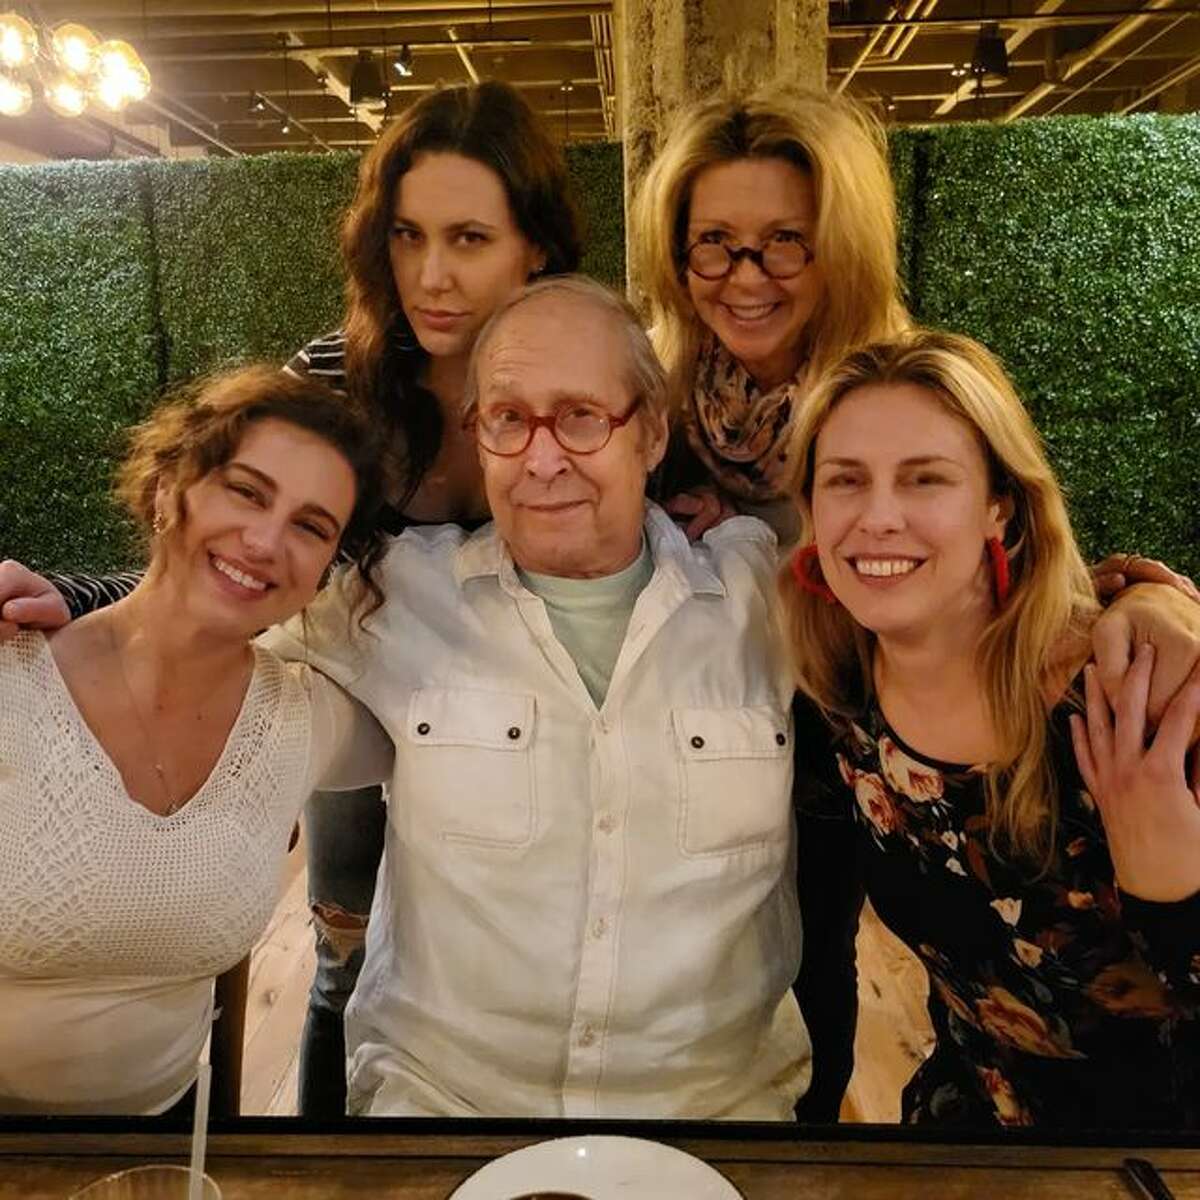 Chevy Chase and his wife Jayni enjoy dinner at The Wheel restaurant in Stamford with their daughters.